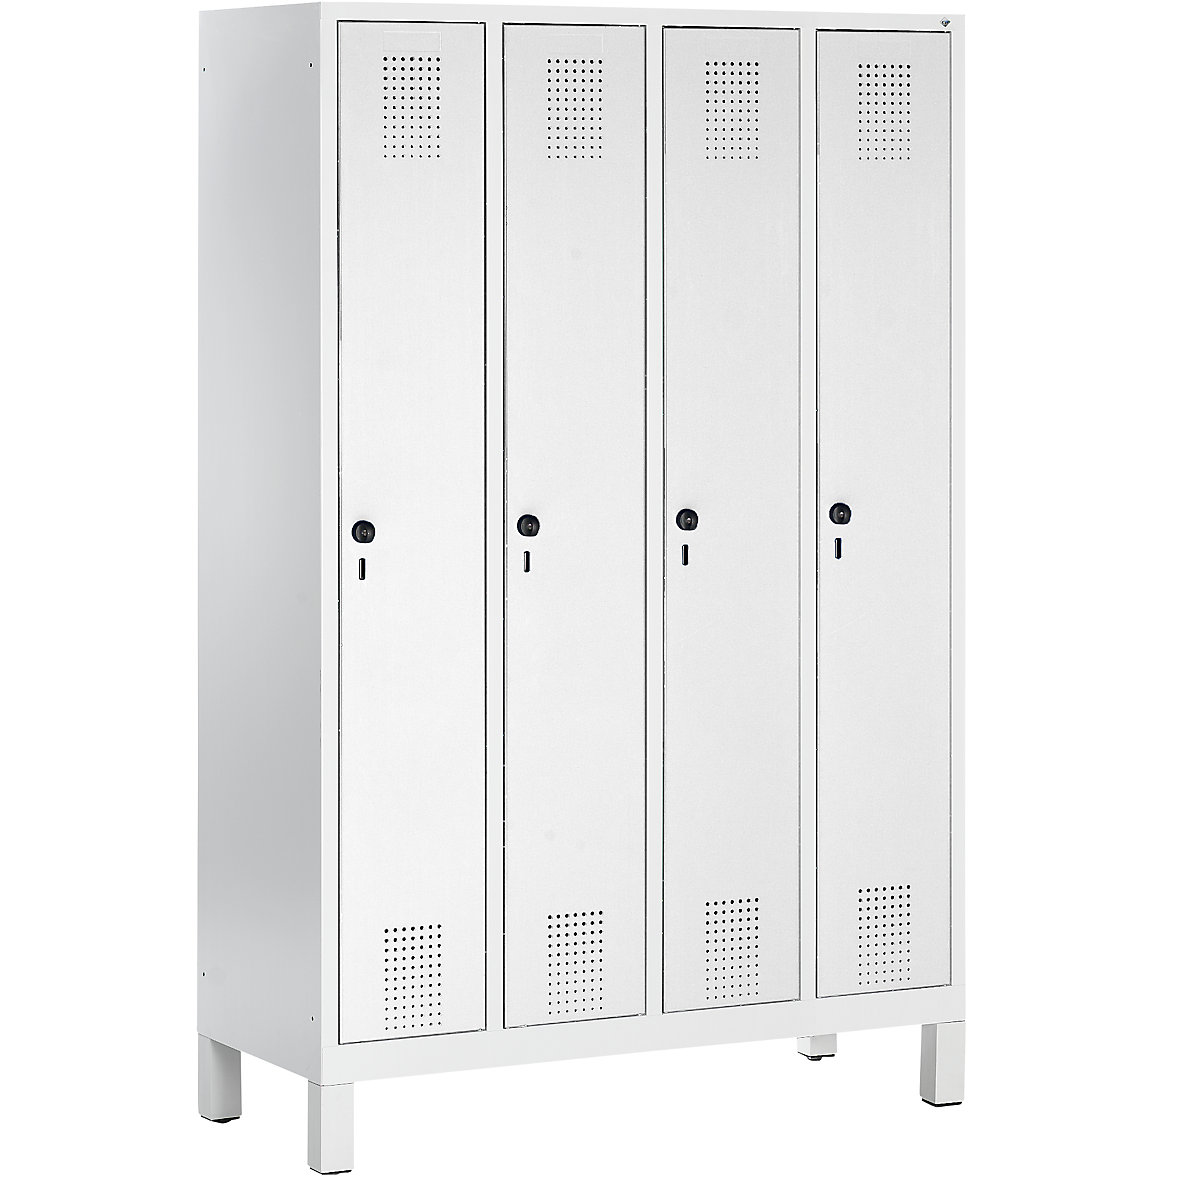 EVOLO cloakroom locker – C+P, with plastic feet, 4 compartments, compartment width 300 mm, light grey